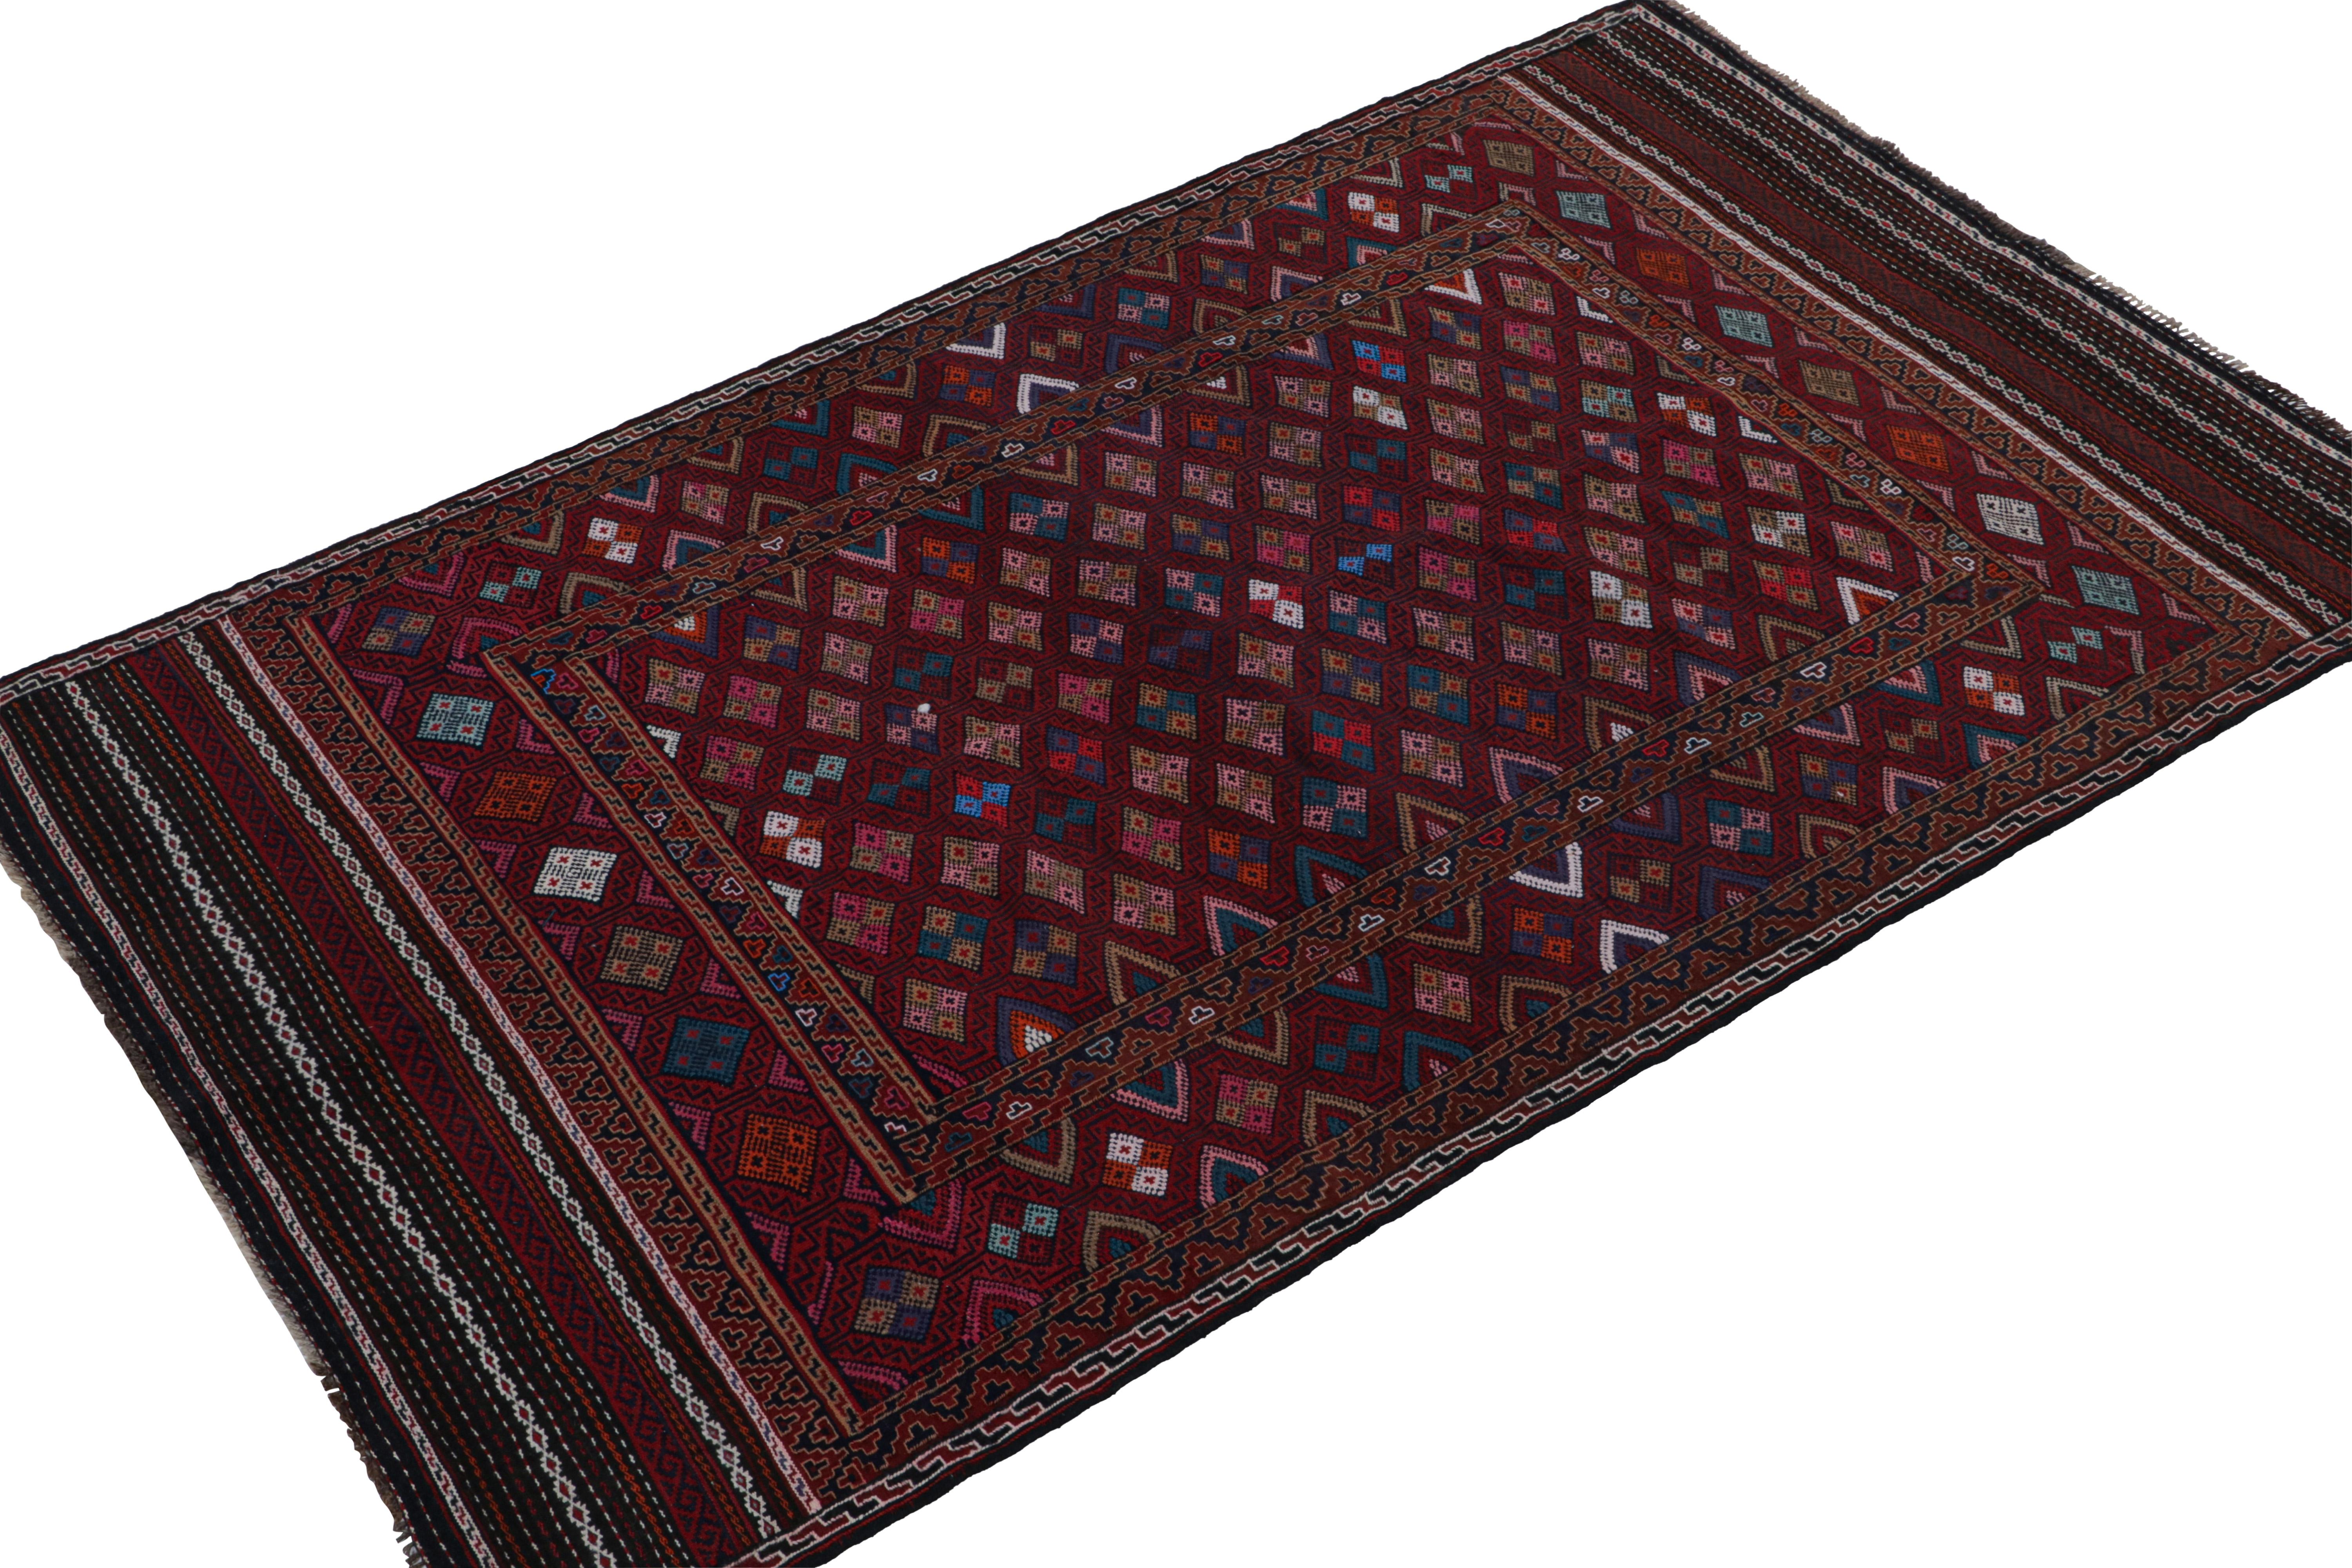 Handwoven in wool circa 1950-1960, this 5x8 vintage kilim is a Baluch rug from Rug & Kilim’s collection of tribal flatweaves. 

On the Design: 

Specifically believed to hail from the Leghari clan of the same nomadic tribe, this piece enjoys a